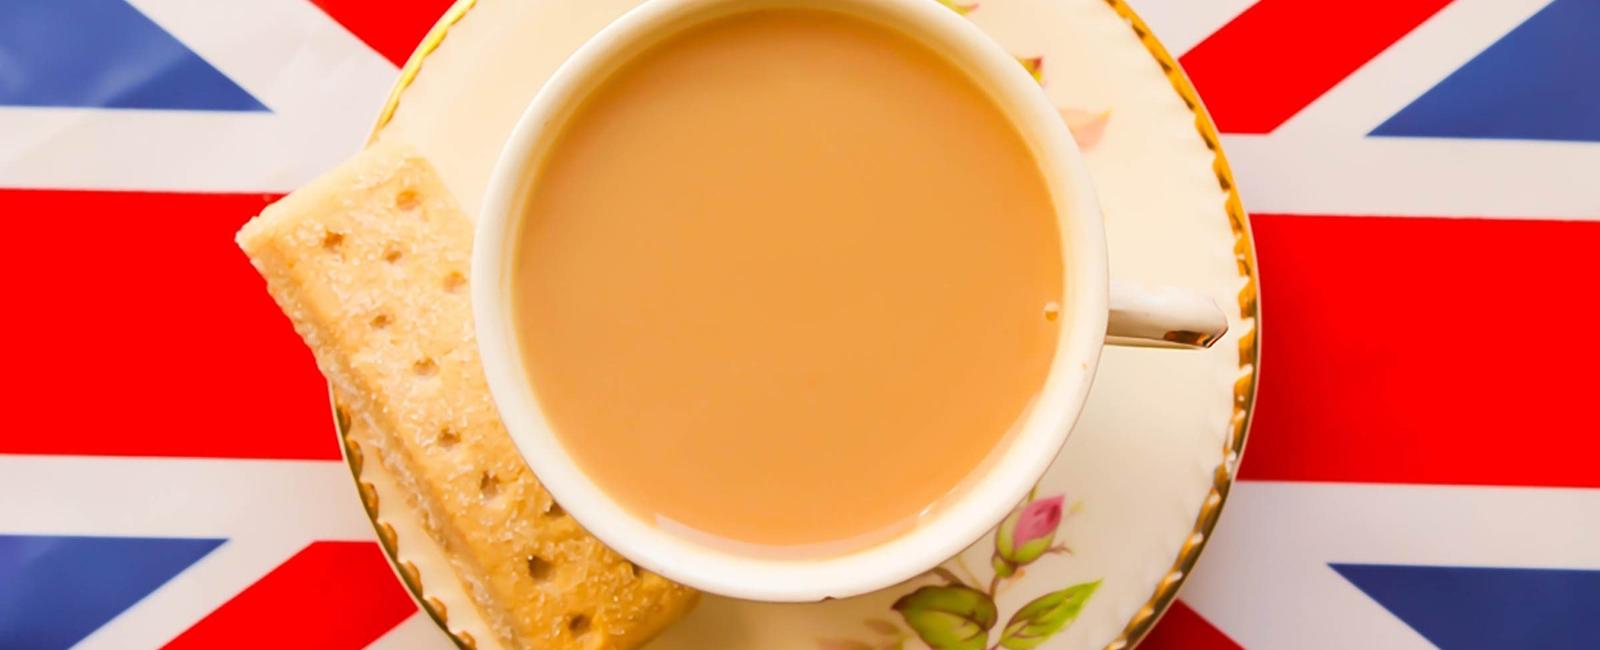 Tea is by far the most popular drink among brits it is estimated that they drink on average 165 million cups of tea every day